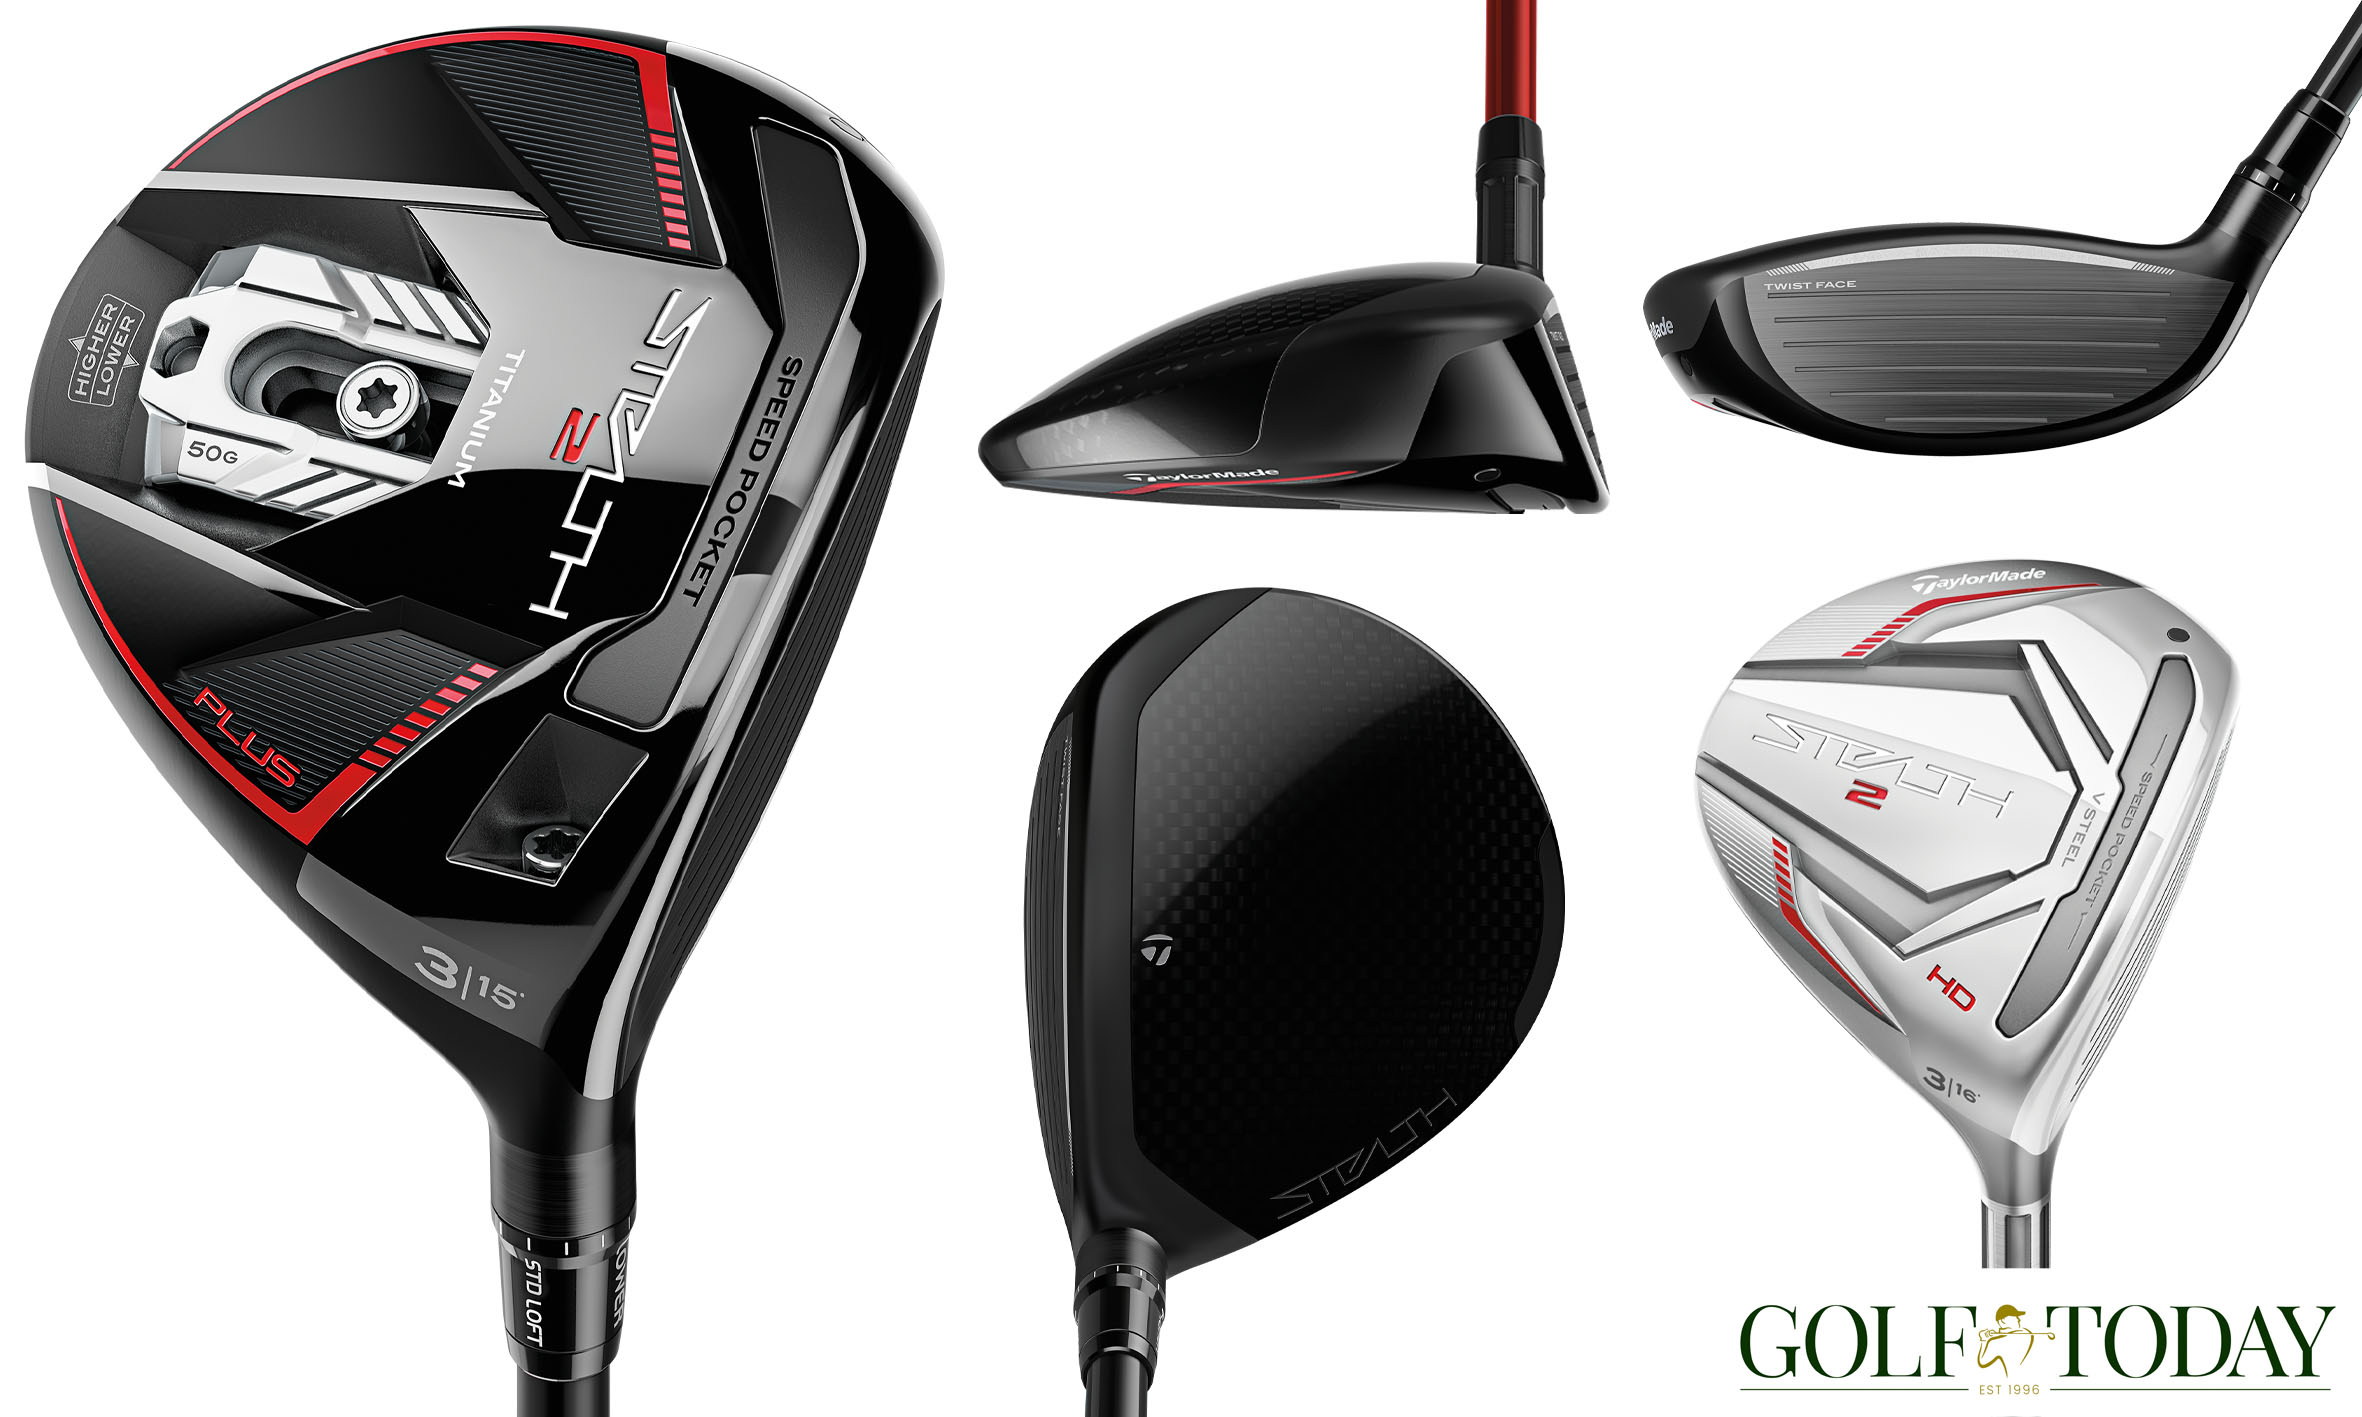 The Stealth 2 Carbonwood Fairway, available for men and women